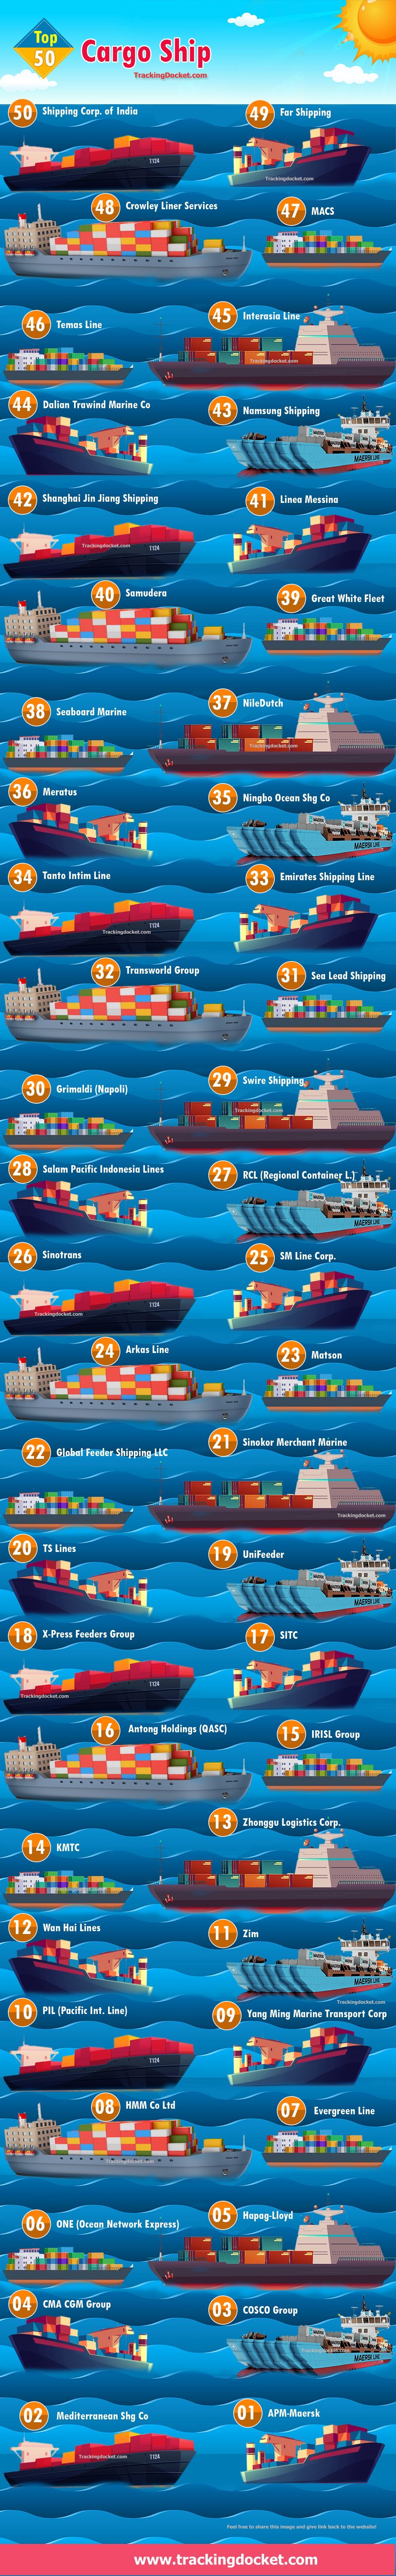 List of Largest Shipping Companies in the World